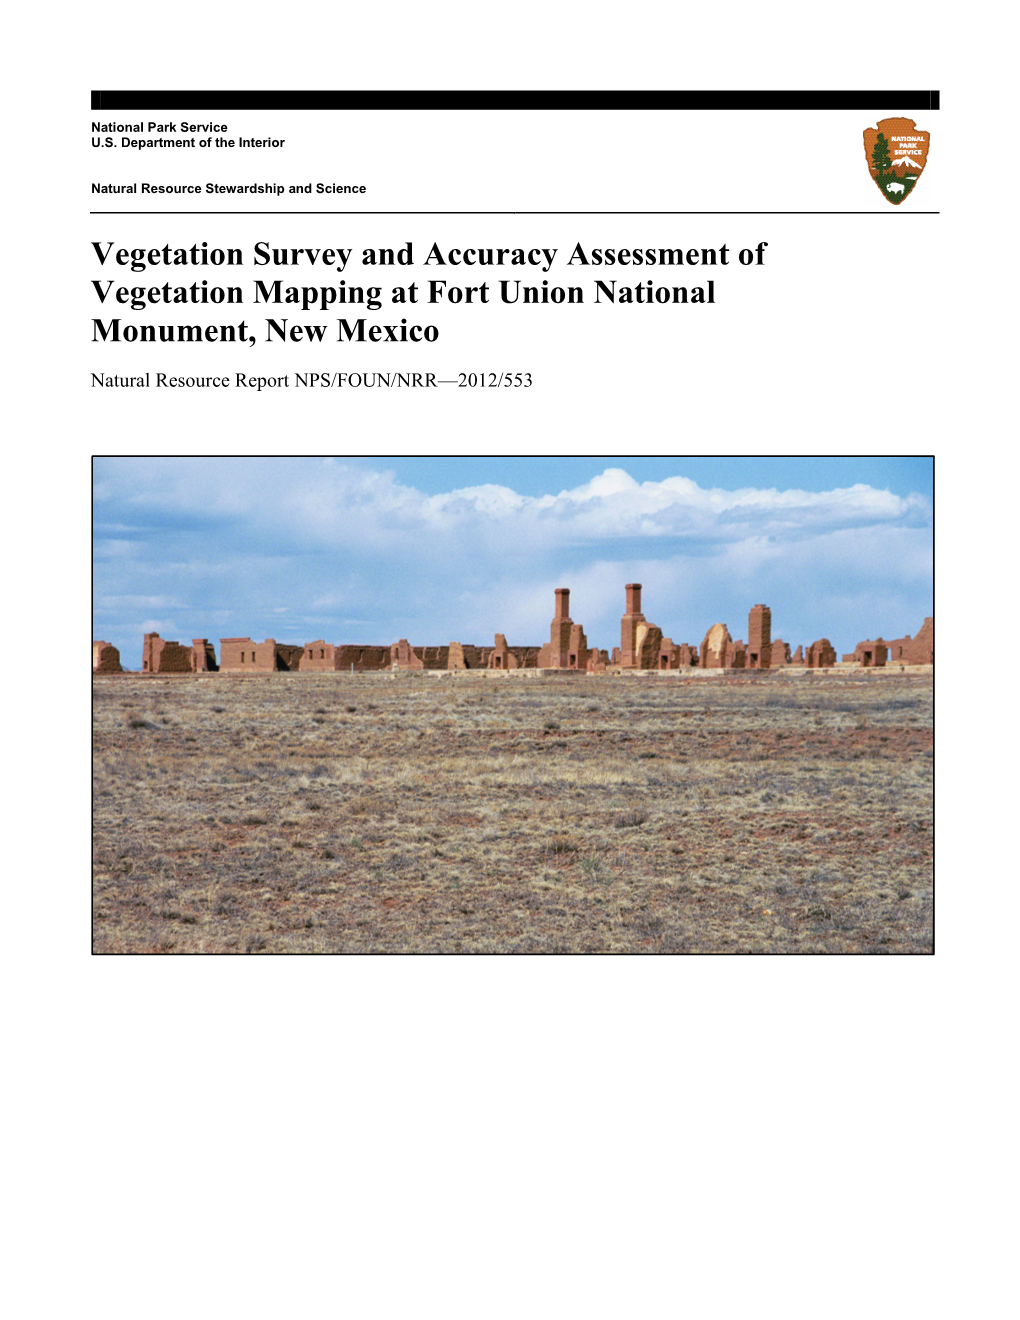 Vegetation Survey and Mapping Accuracy Assessement Report